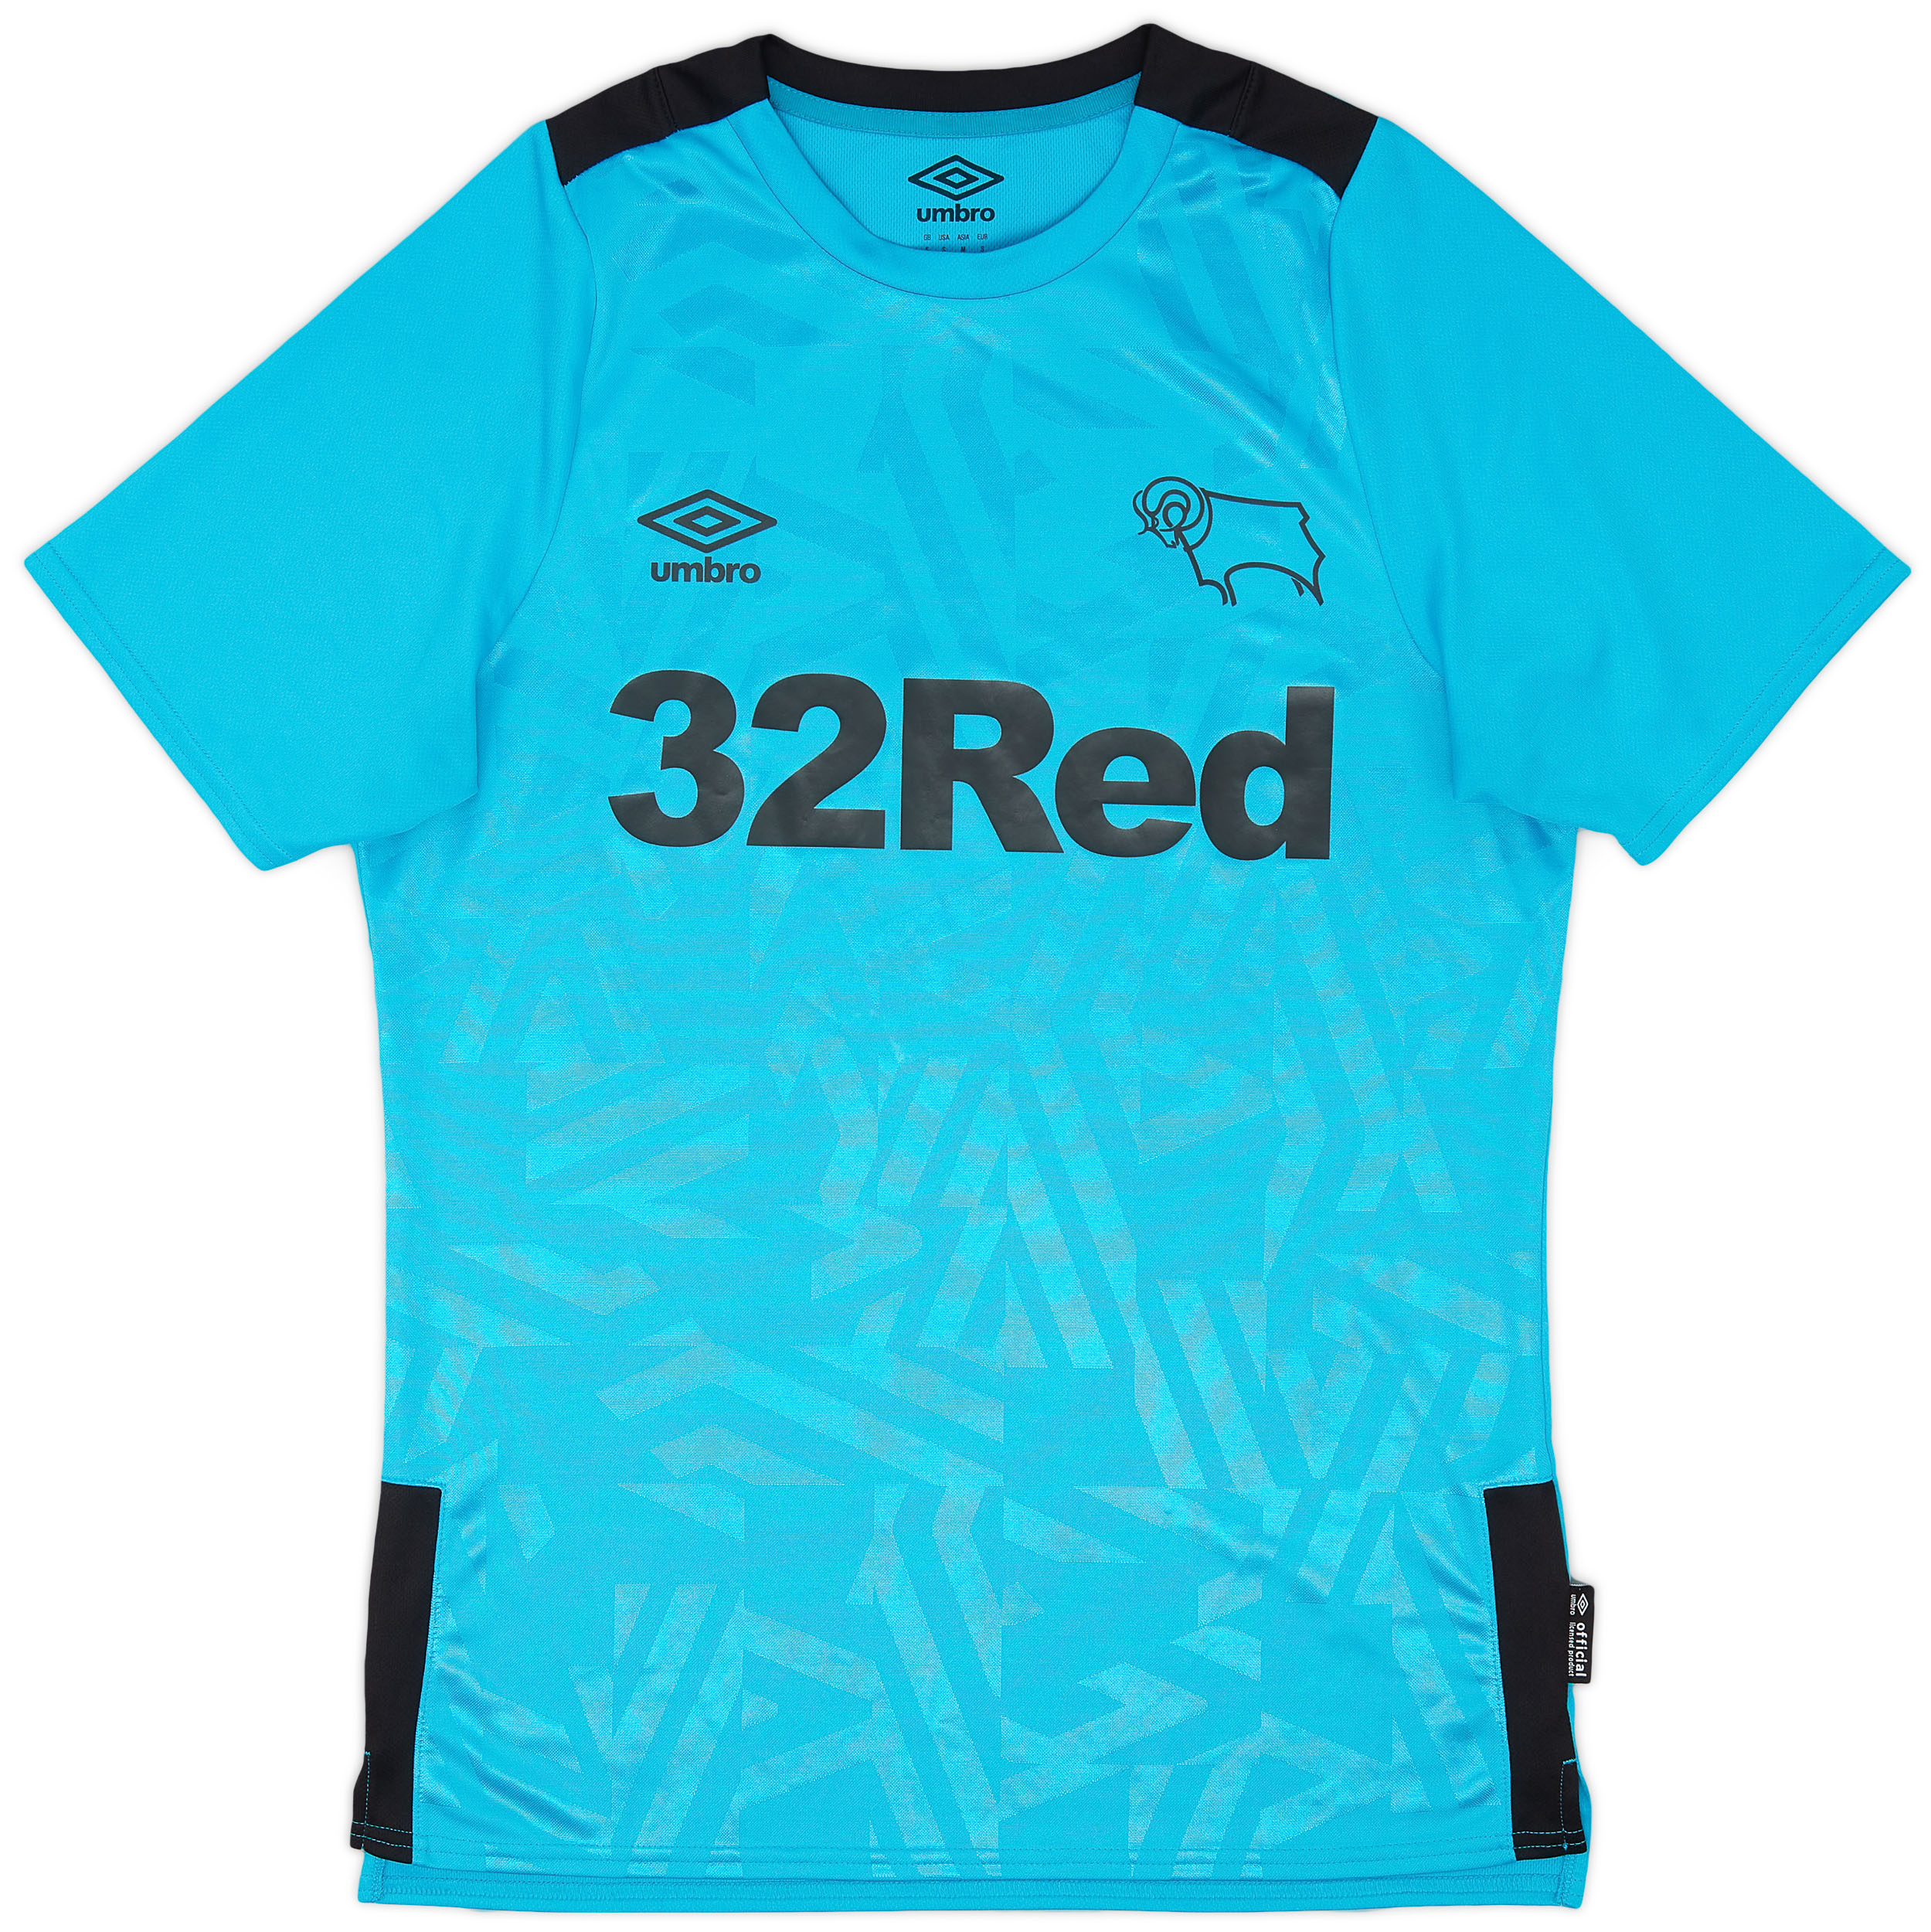 2019-20 Derby County Away Shirt - 8/10 - ()